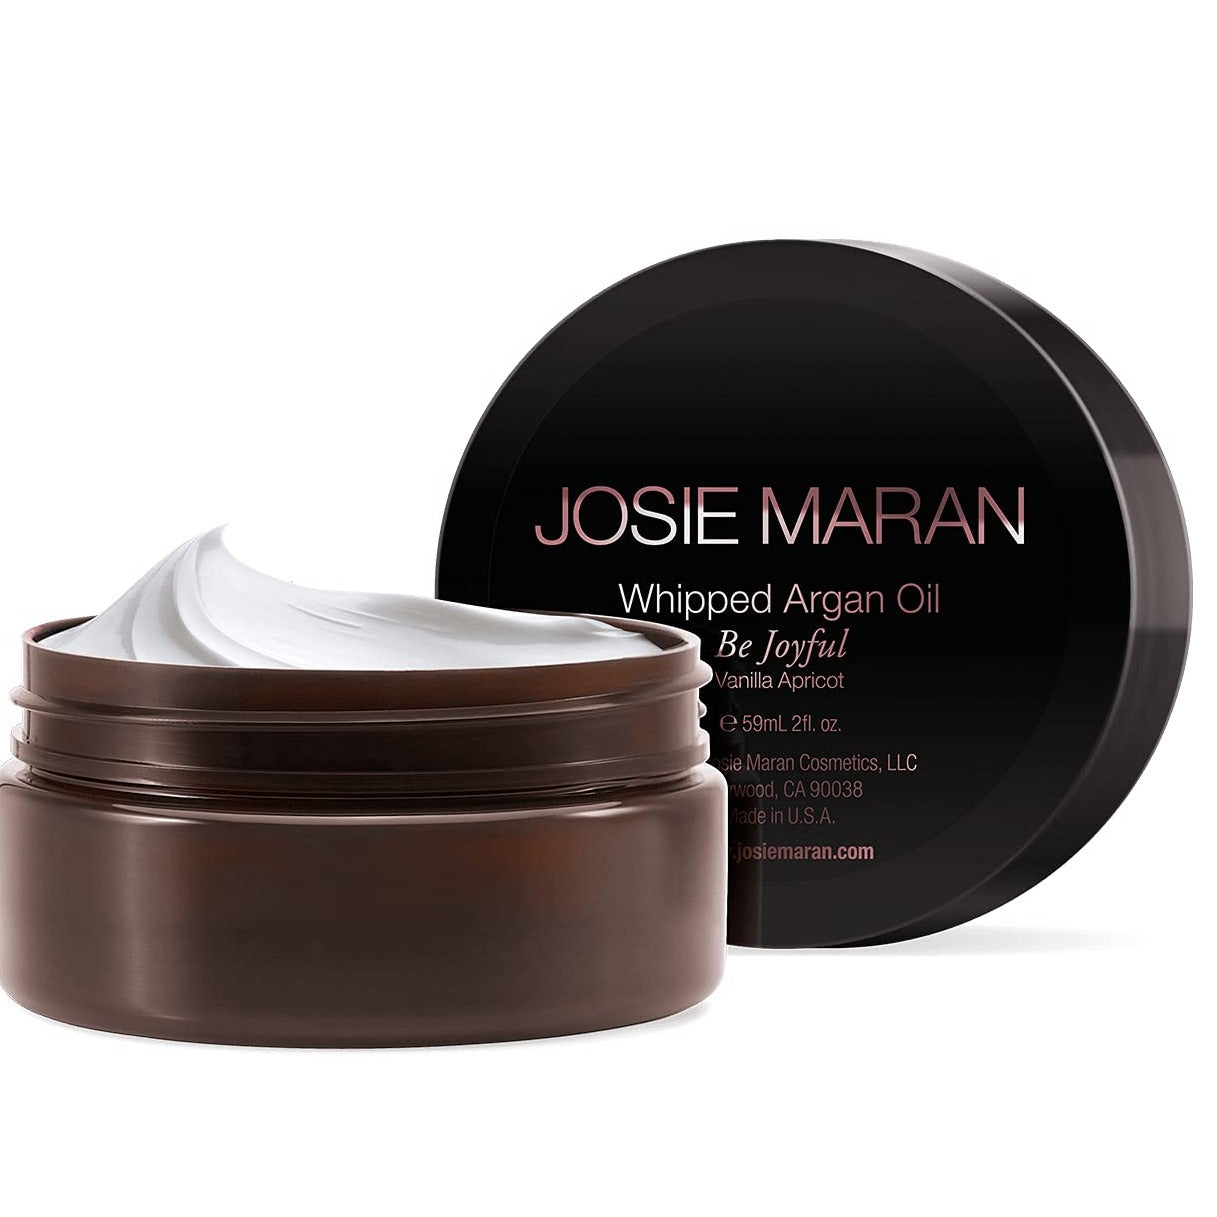 Revitalize skin, restore softness, and improve skin’s texture with the nourishing power of Josie’s signature 100% Pure Argan Oil whipped to buttery perfection.  Our famous formula harnesses the essential fatty acids in Argan Oil to seal in the hydrating benefits of shea butter and the conditioning effects of avocado oil. Fortified with white tea extract to help protect from environmental damage, skin will be deeply hydrated, firmer, and extra juicy.